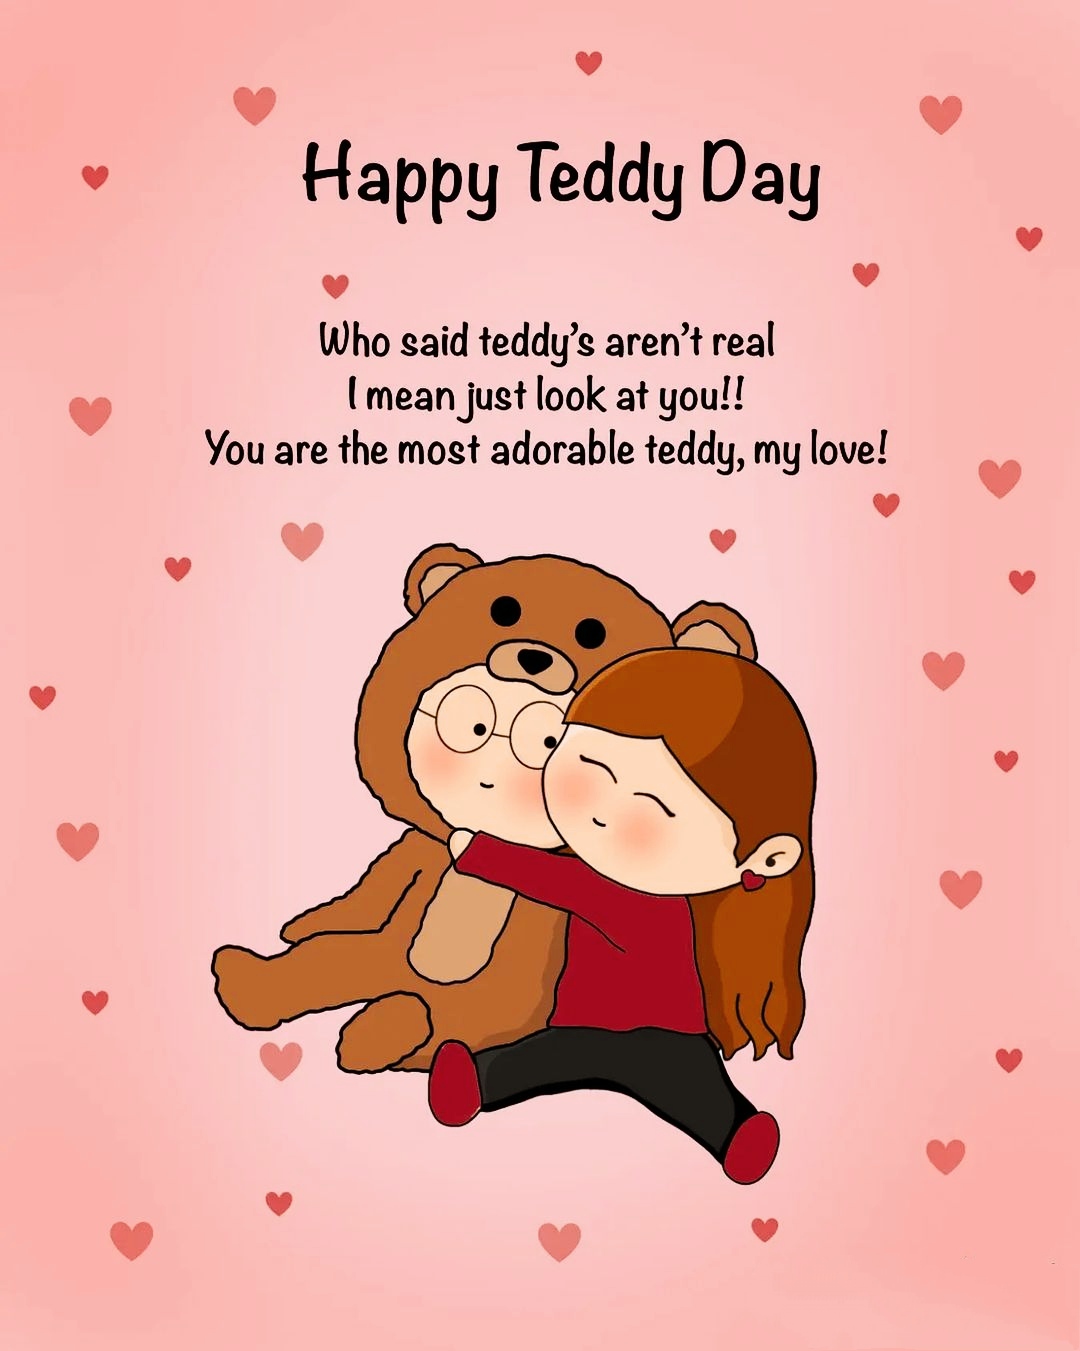 Valentine Teddy Day Images